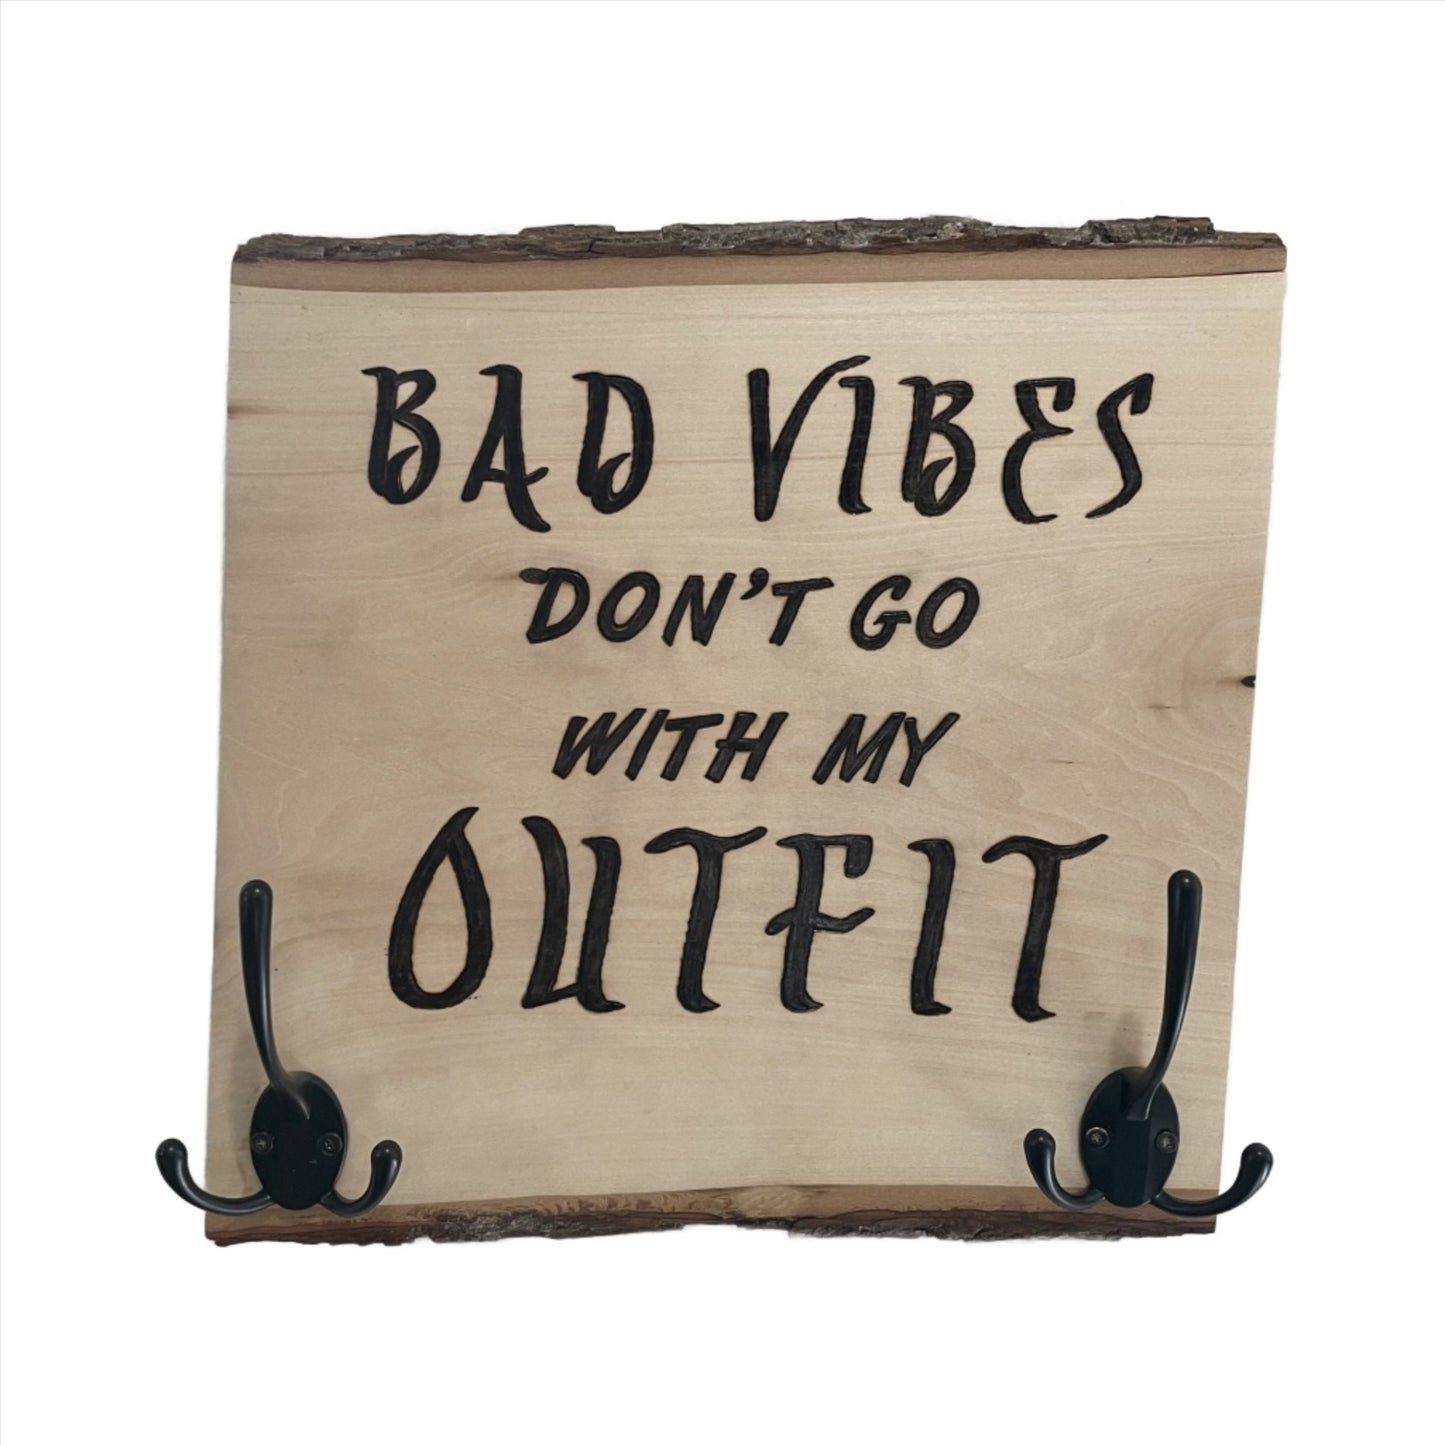 Bad Vibes Don't Go With My Outfit Wood Burned and Painted with Keys Hooks Coat Hooks and Backing for Wall Hanging